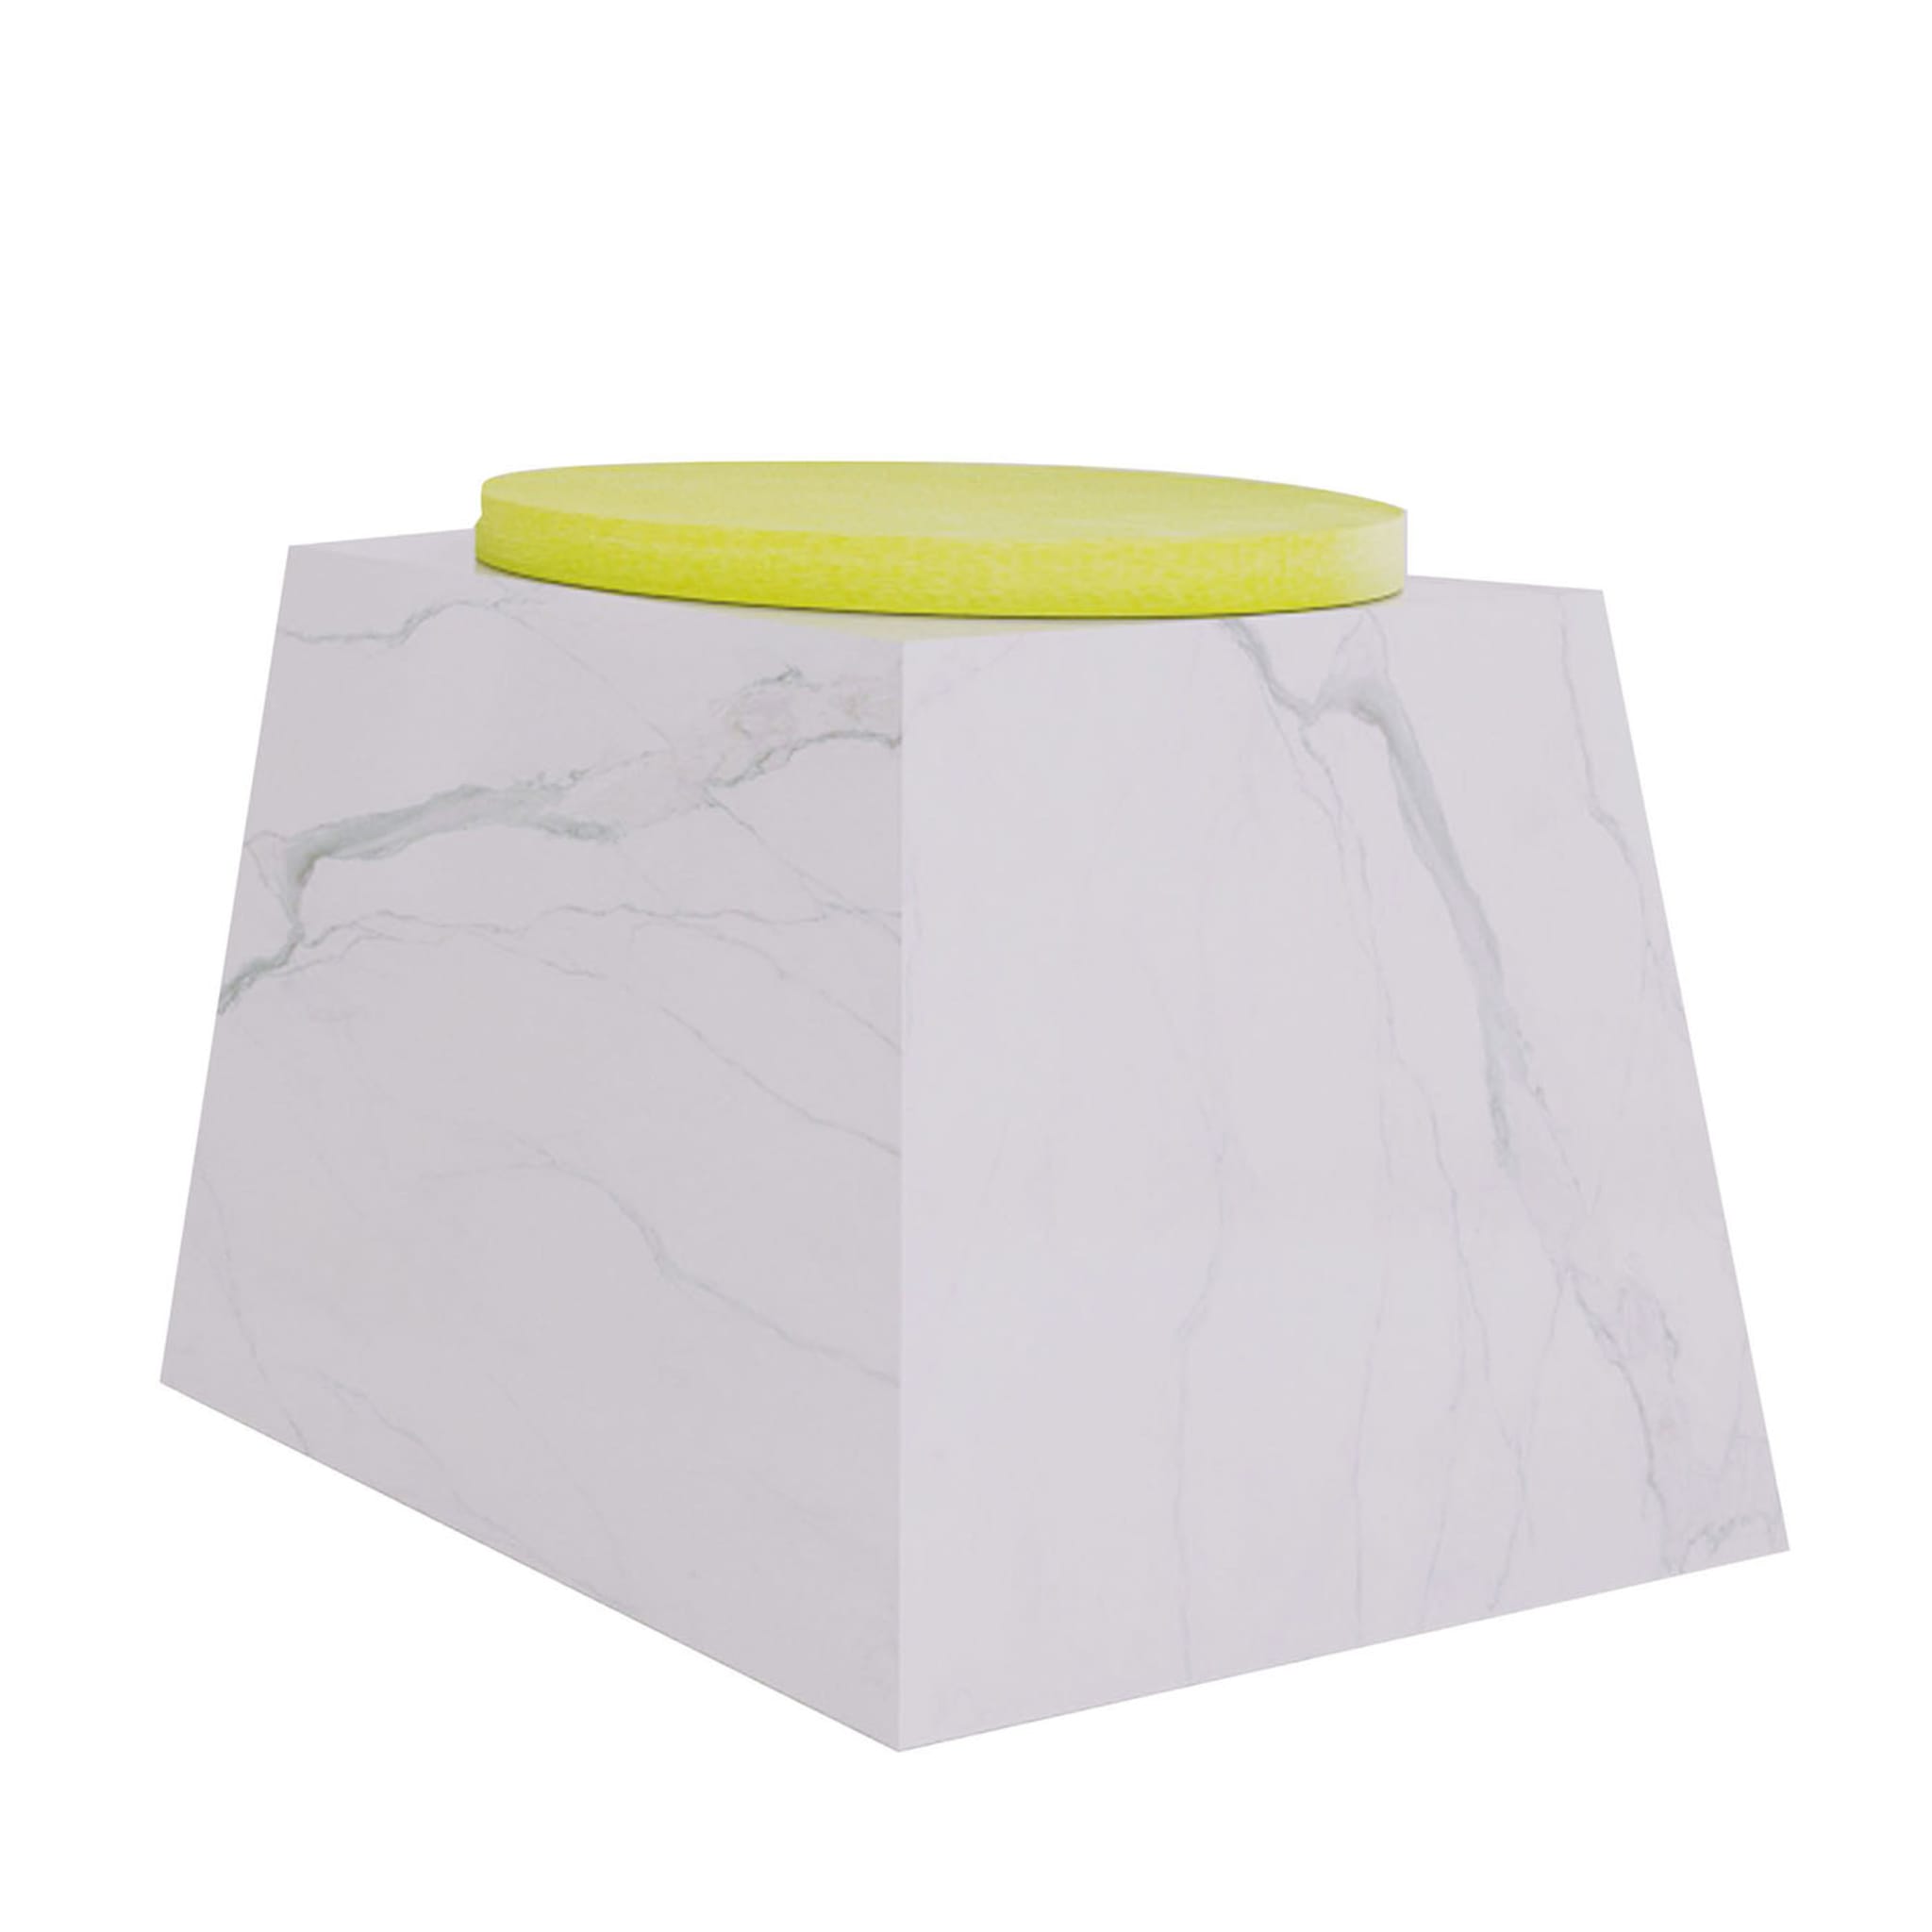 Trape Carrara Stool with Yellow Seat by Sid&sign - Main view